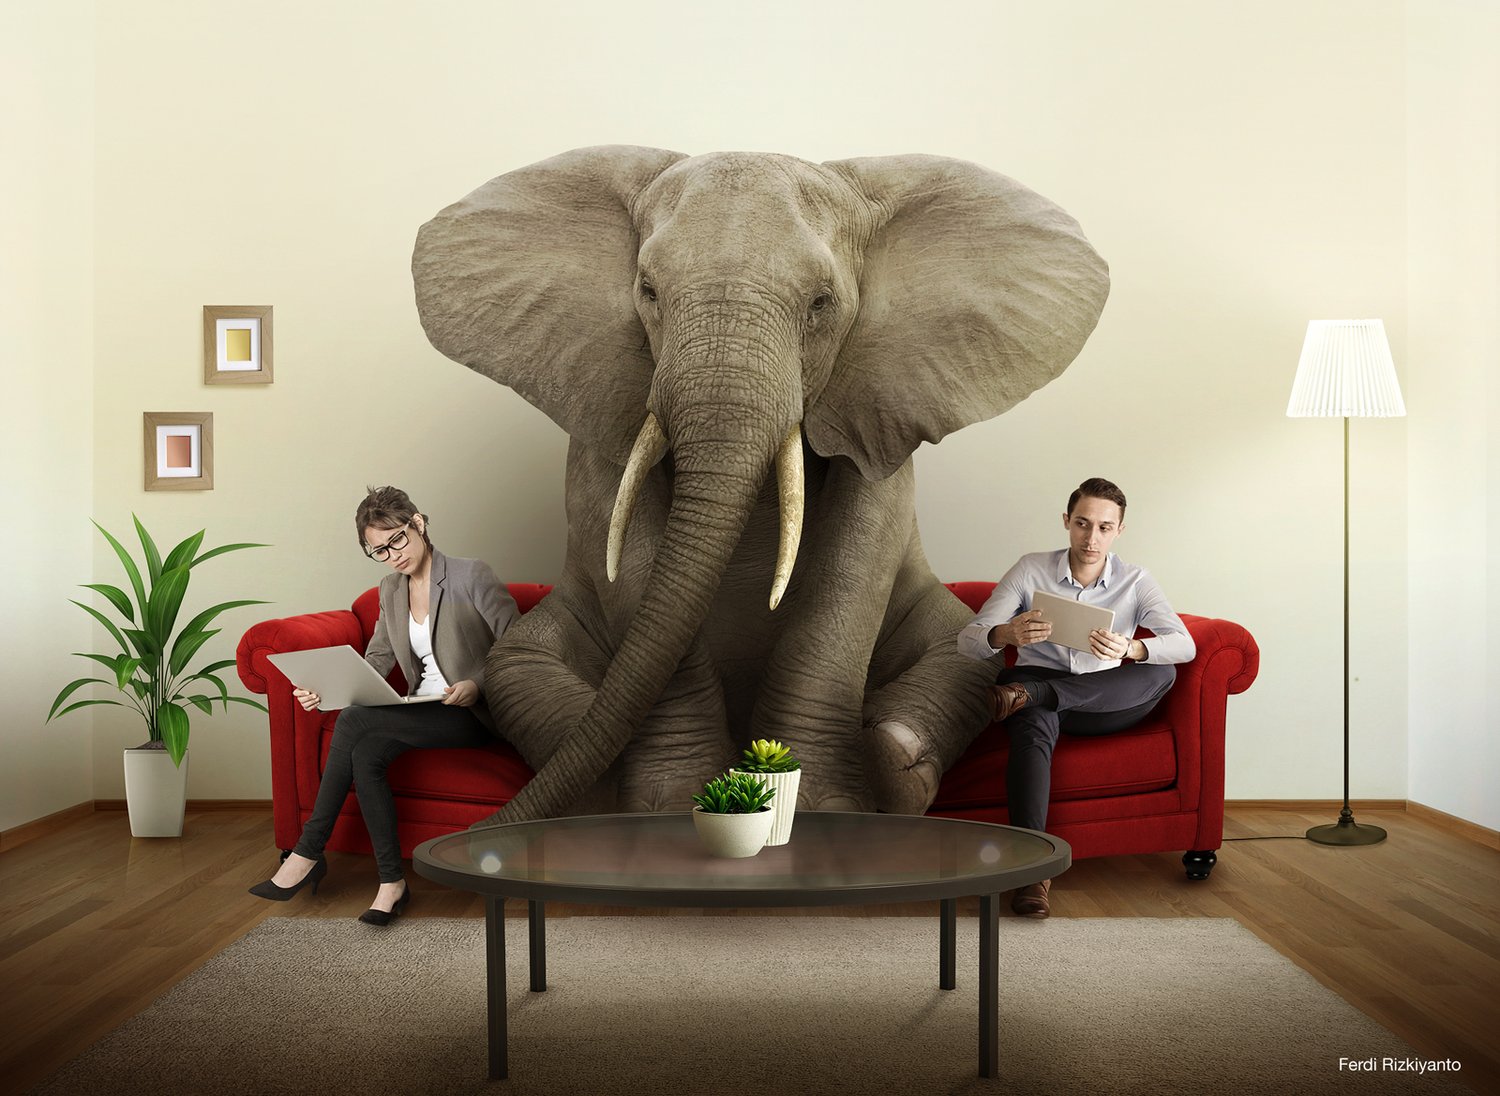 The Elephant In The Living Room Meaning